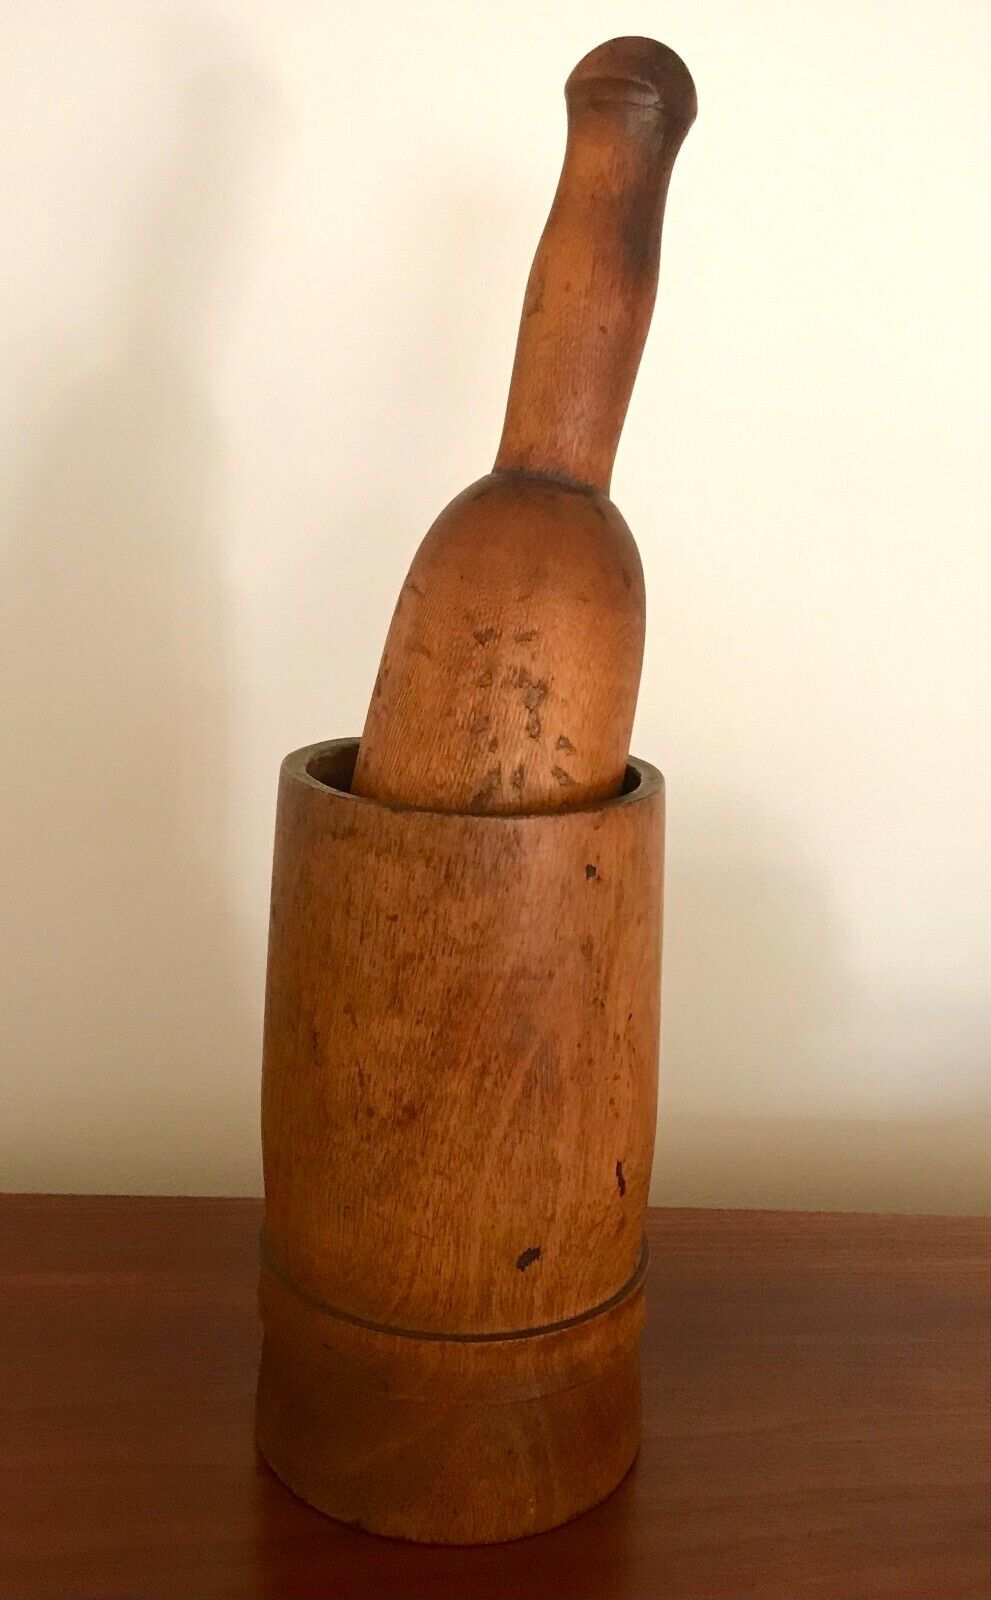 Antique Valuations: Early Antique Wooden Mortar and Pestle